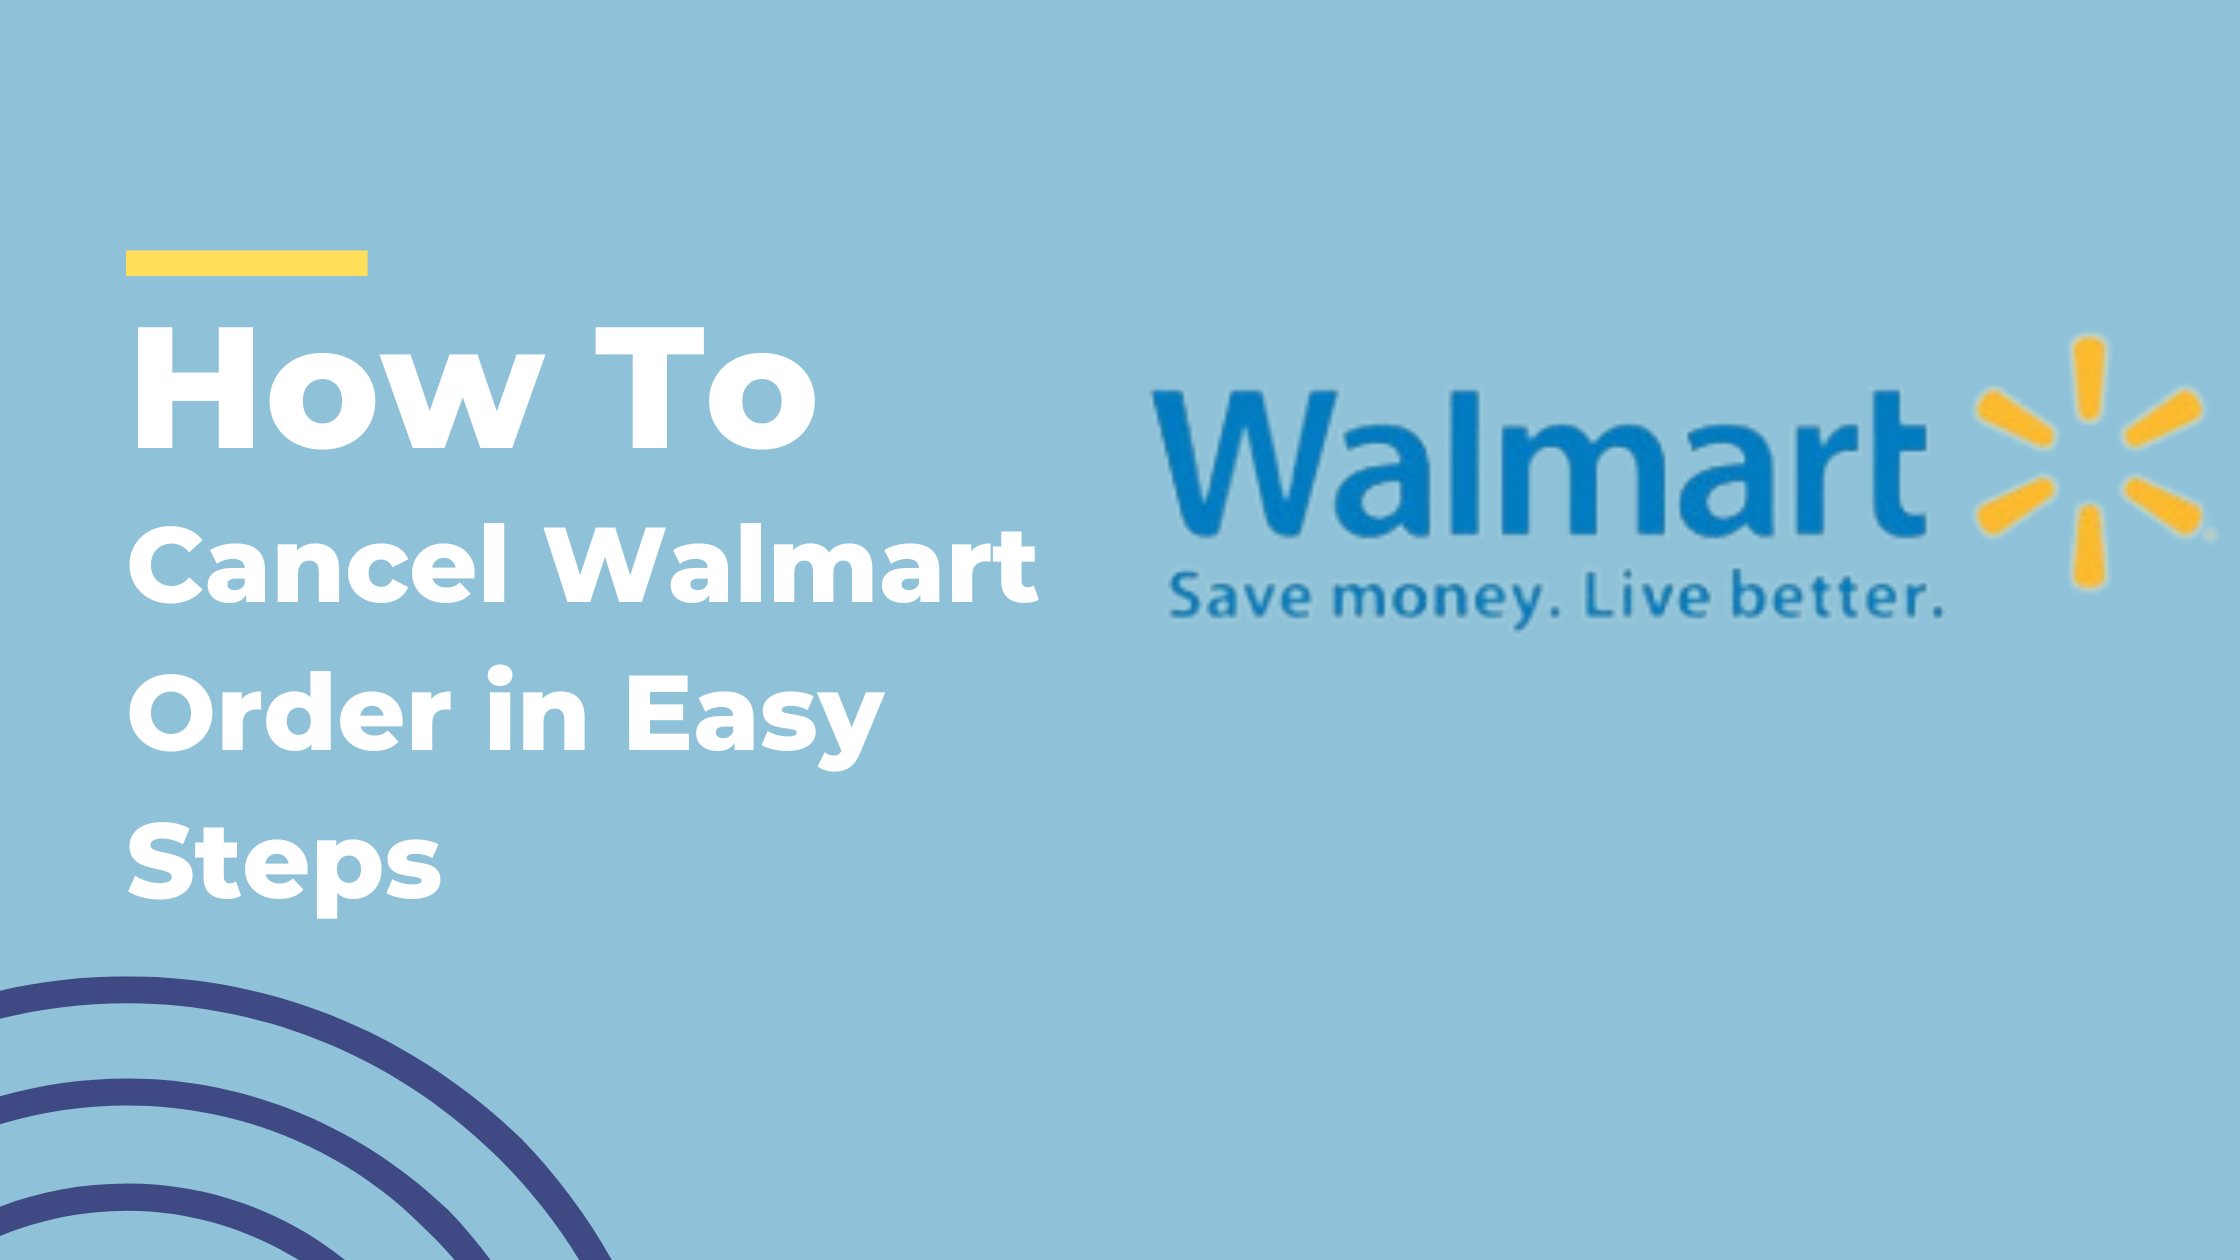 How to Cancel Walmart Order